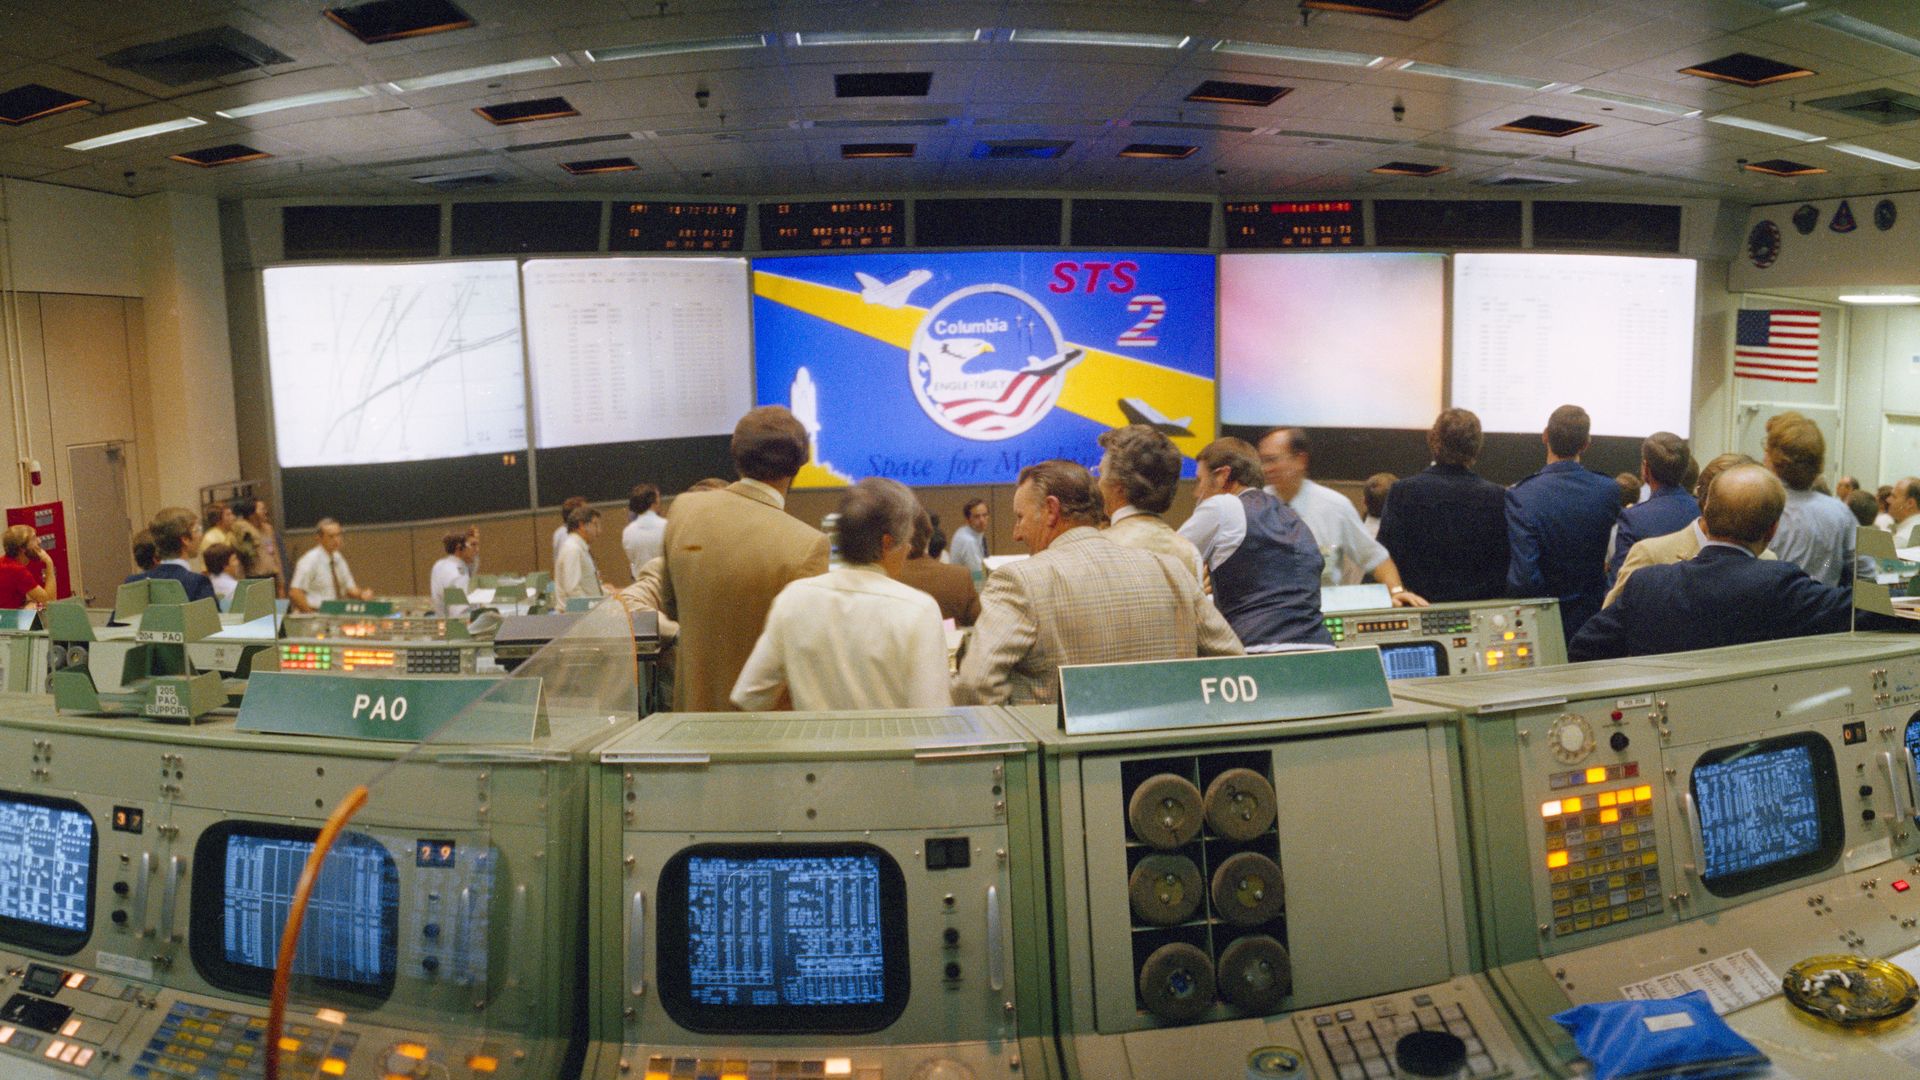 Photo of computers and projector screen inside mission control. 